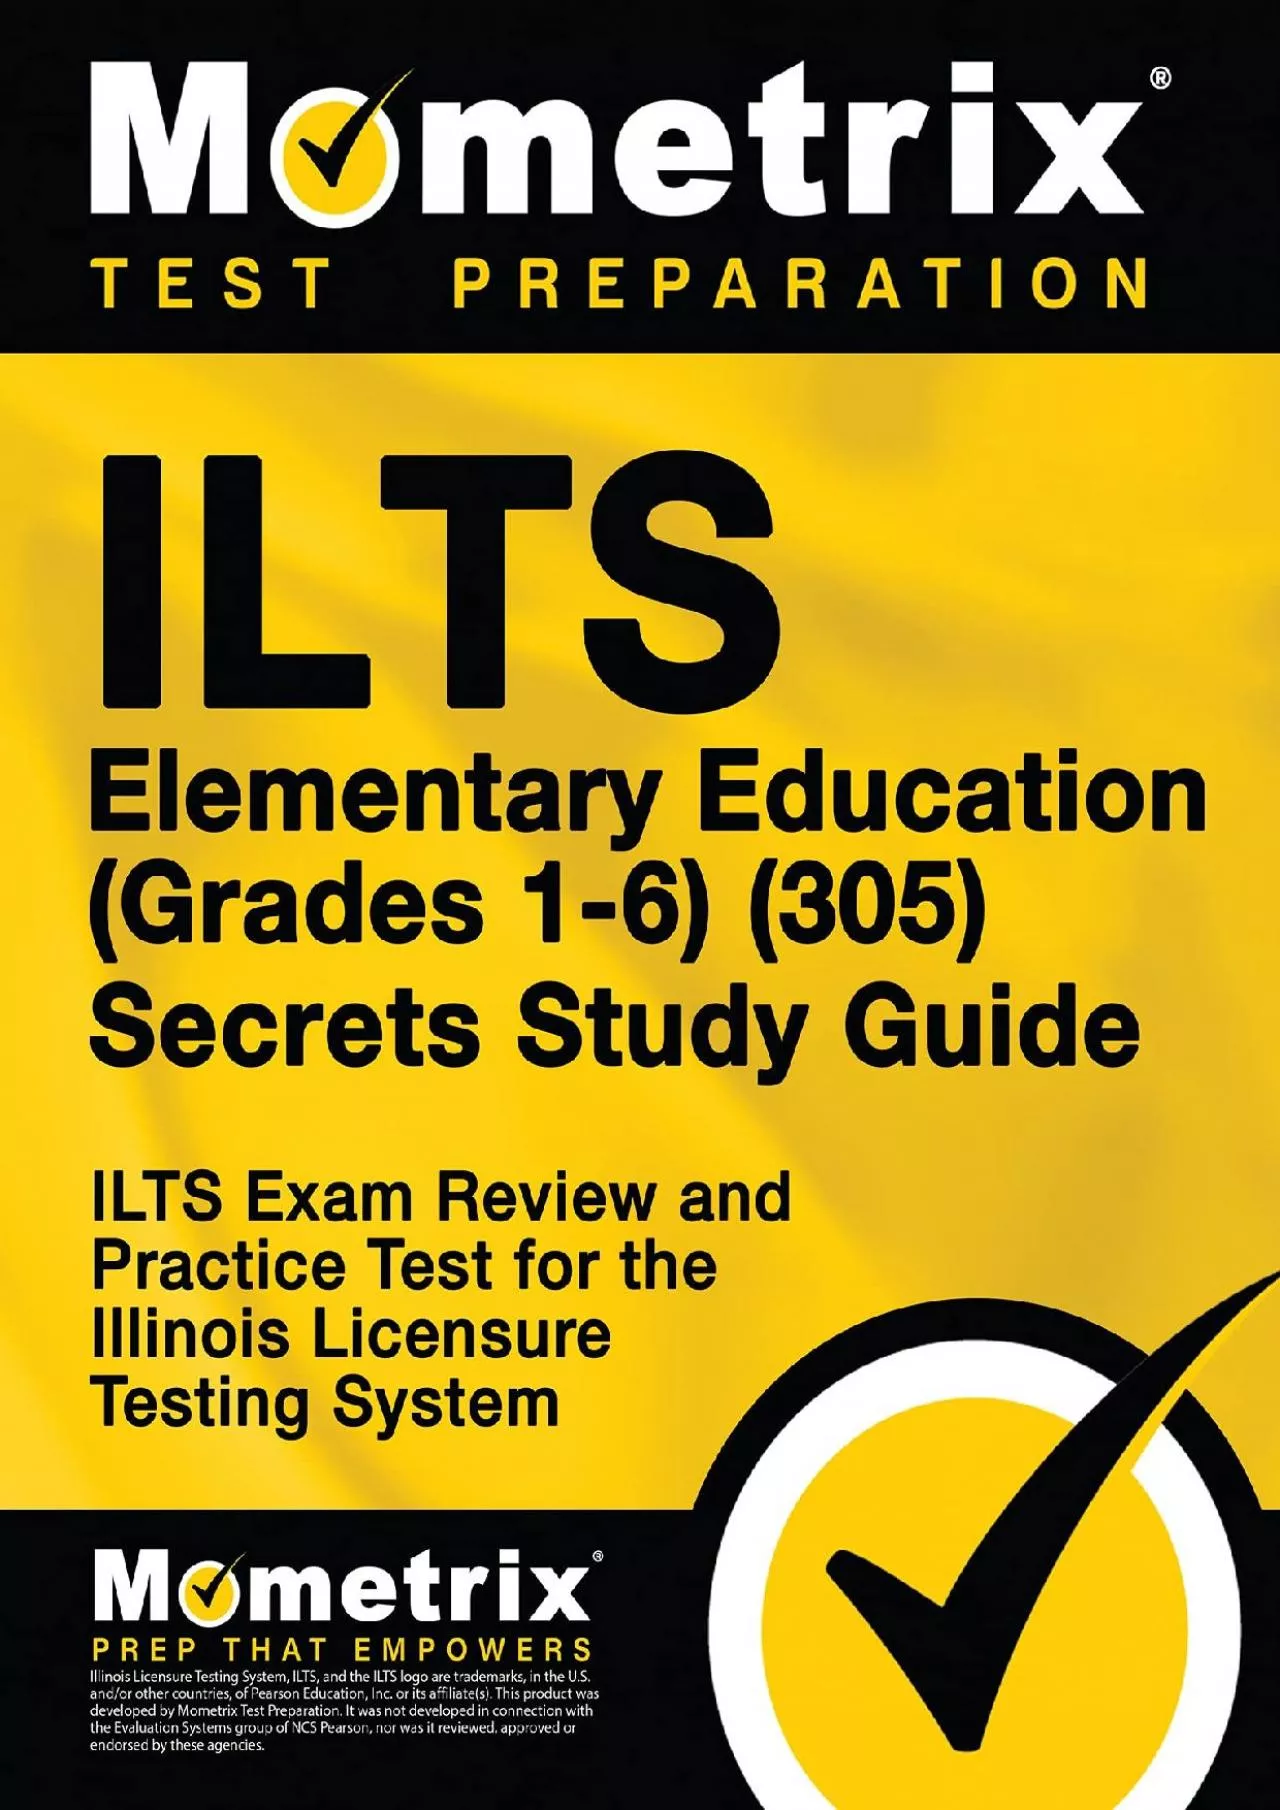 [DOWNLOAD] ILTS Elementary Education Grades 1-6 305 Secrets Study Guide: ILTS Exam Review